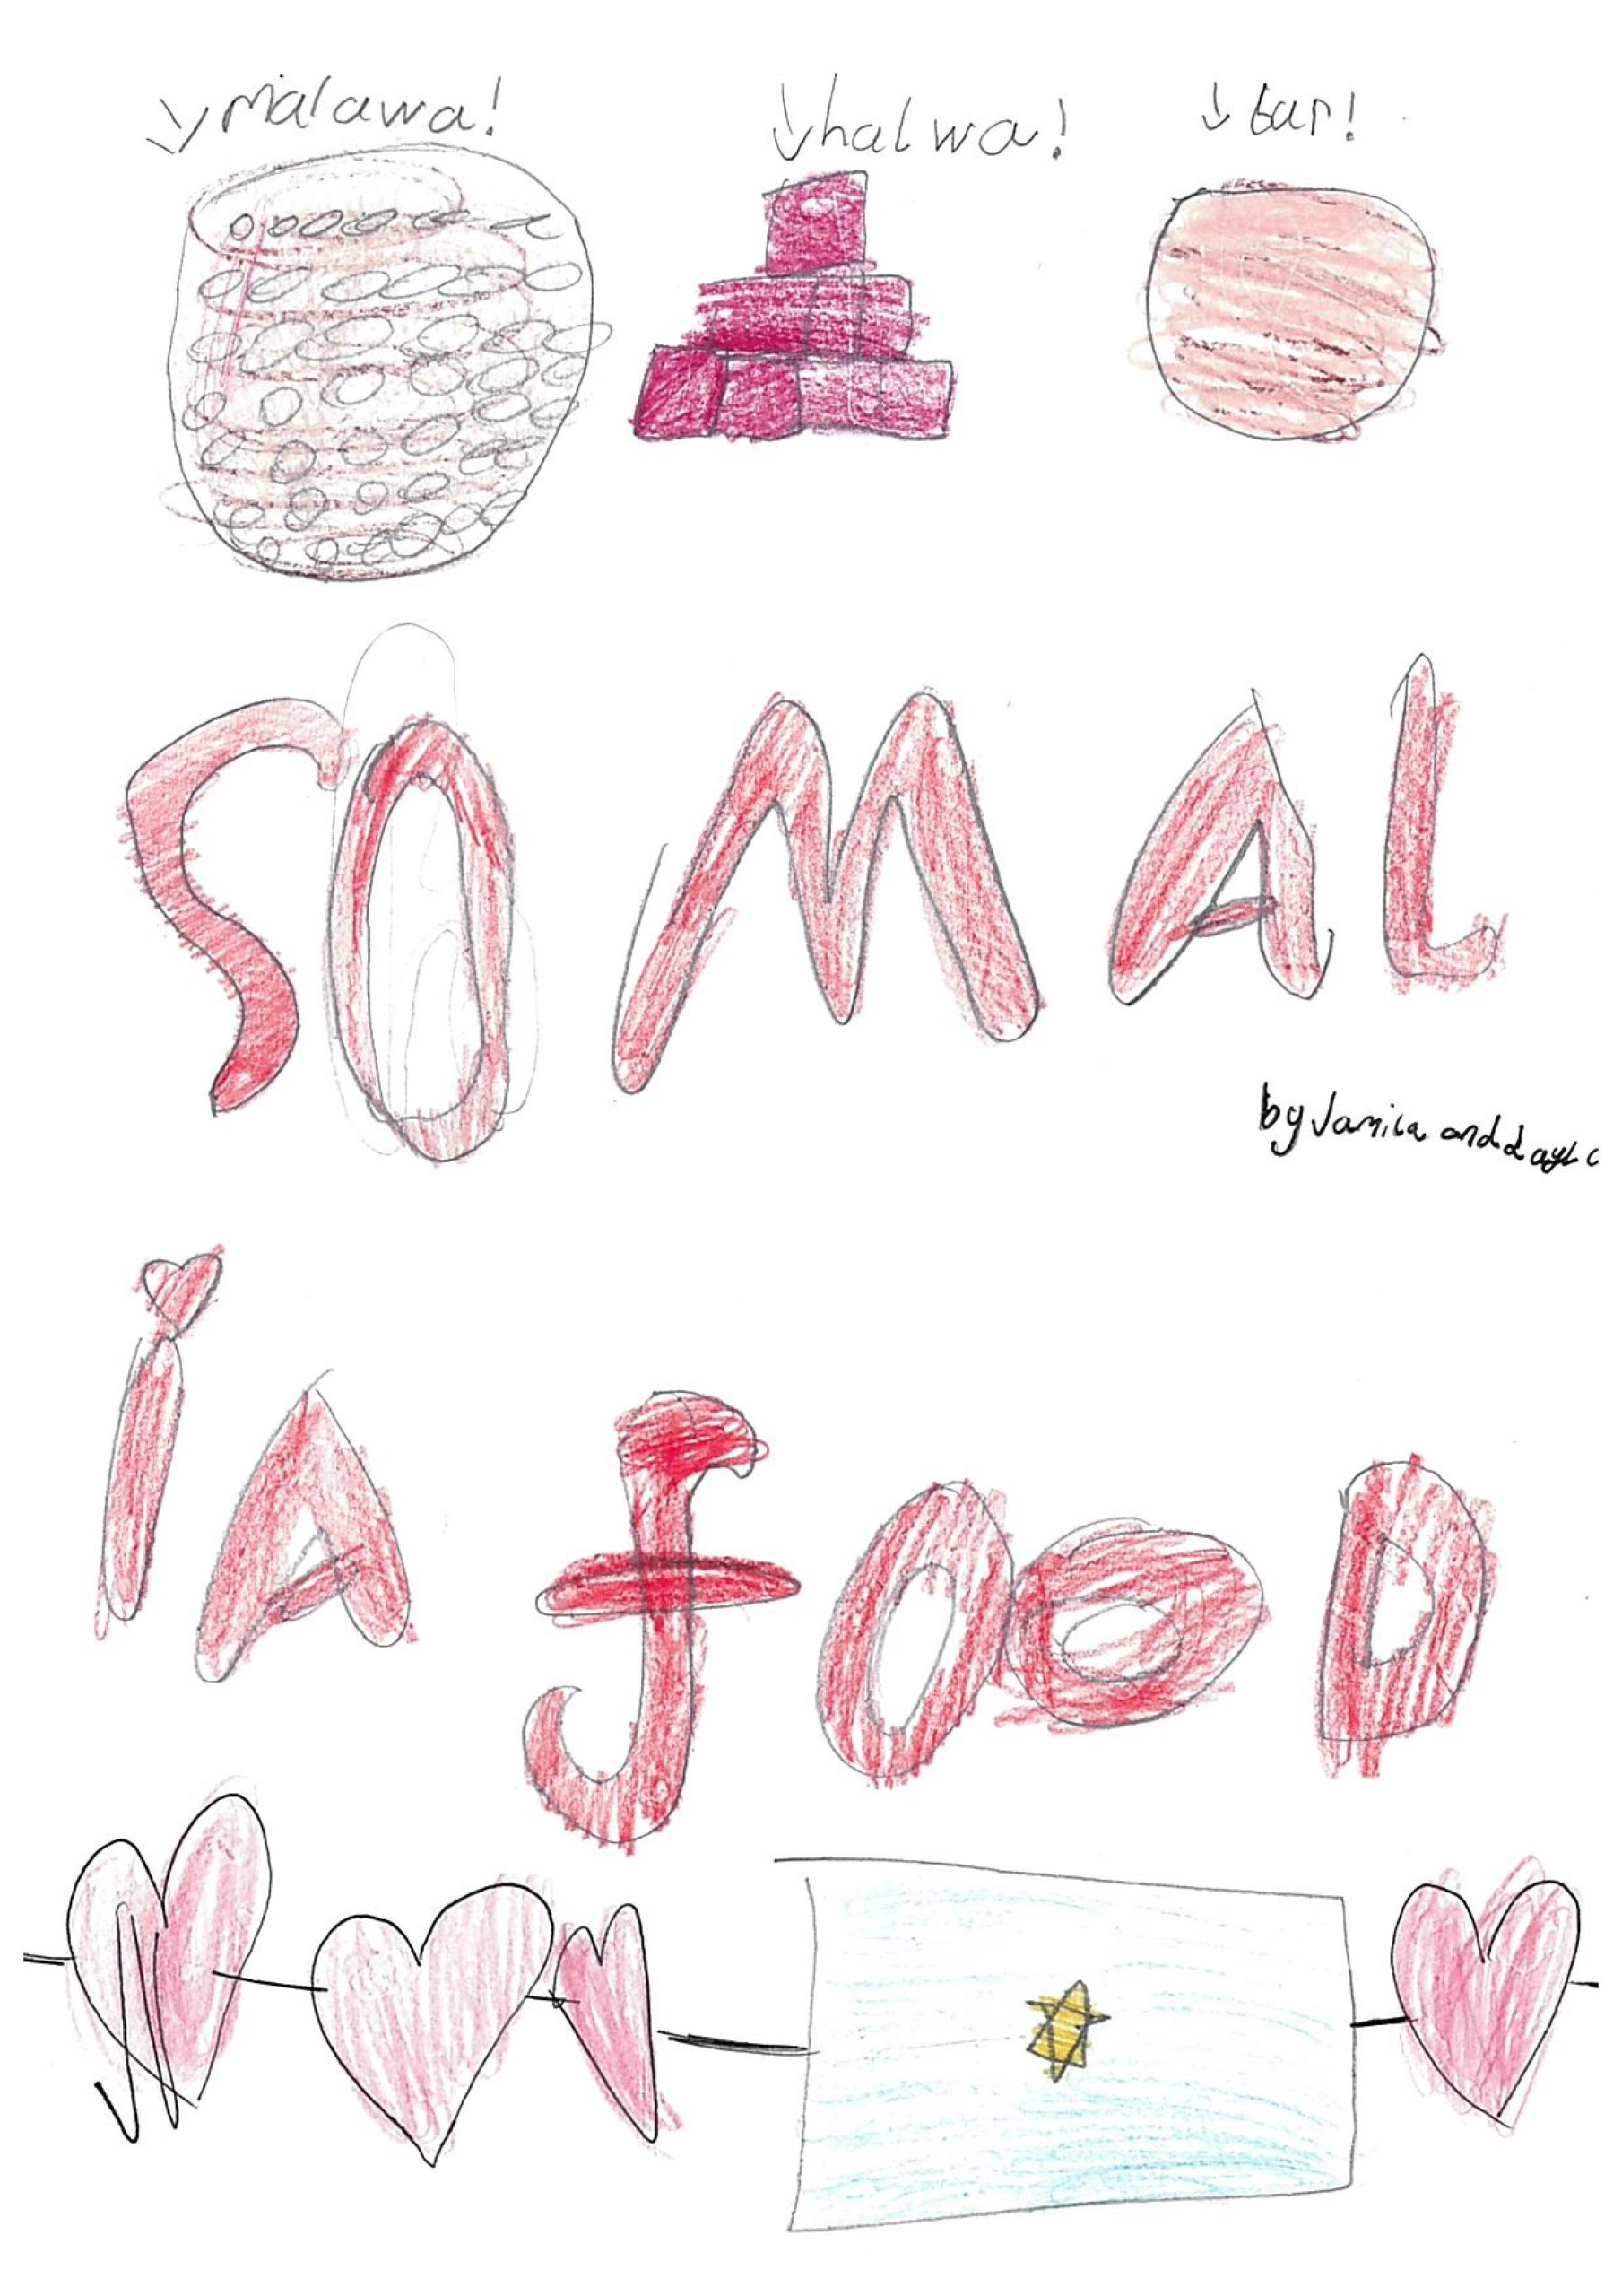 Drawing of bubble-writing that reads "Somalia Food" with drawings of Somali food (malawa, halwa, bar) and love hearts. By Jamila and Layla